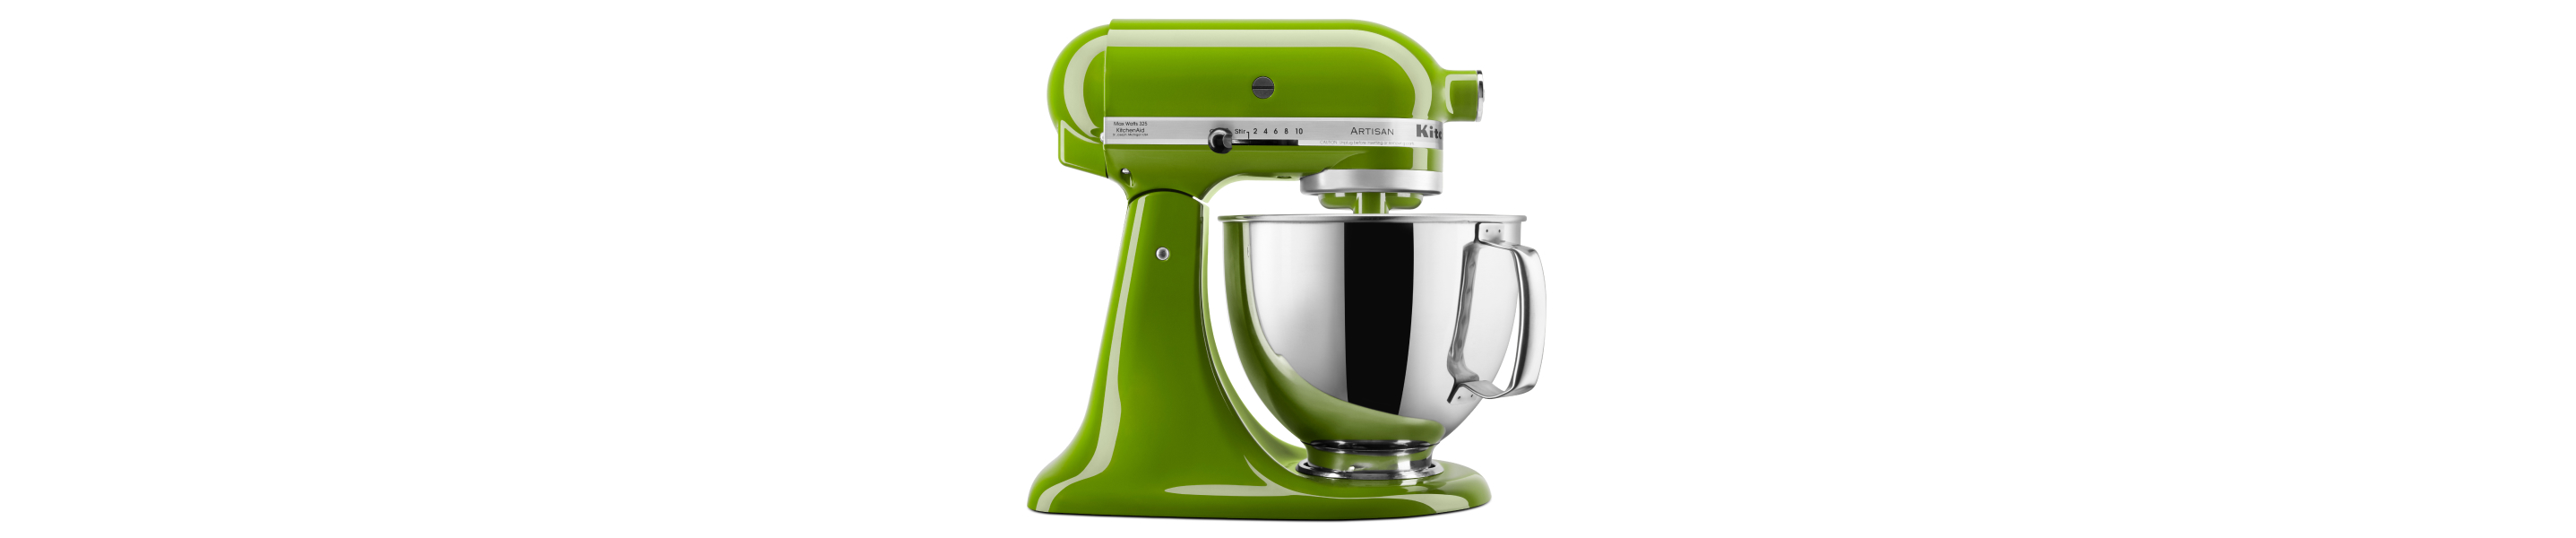 fly besværlige tag på sightseeing Best KitchenAid® Stand Mixer Colors for Your Kitchen | KitchenAid